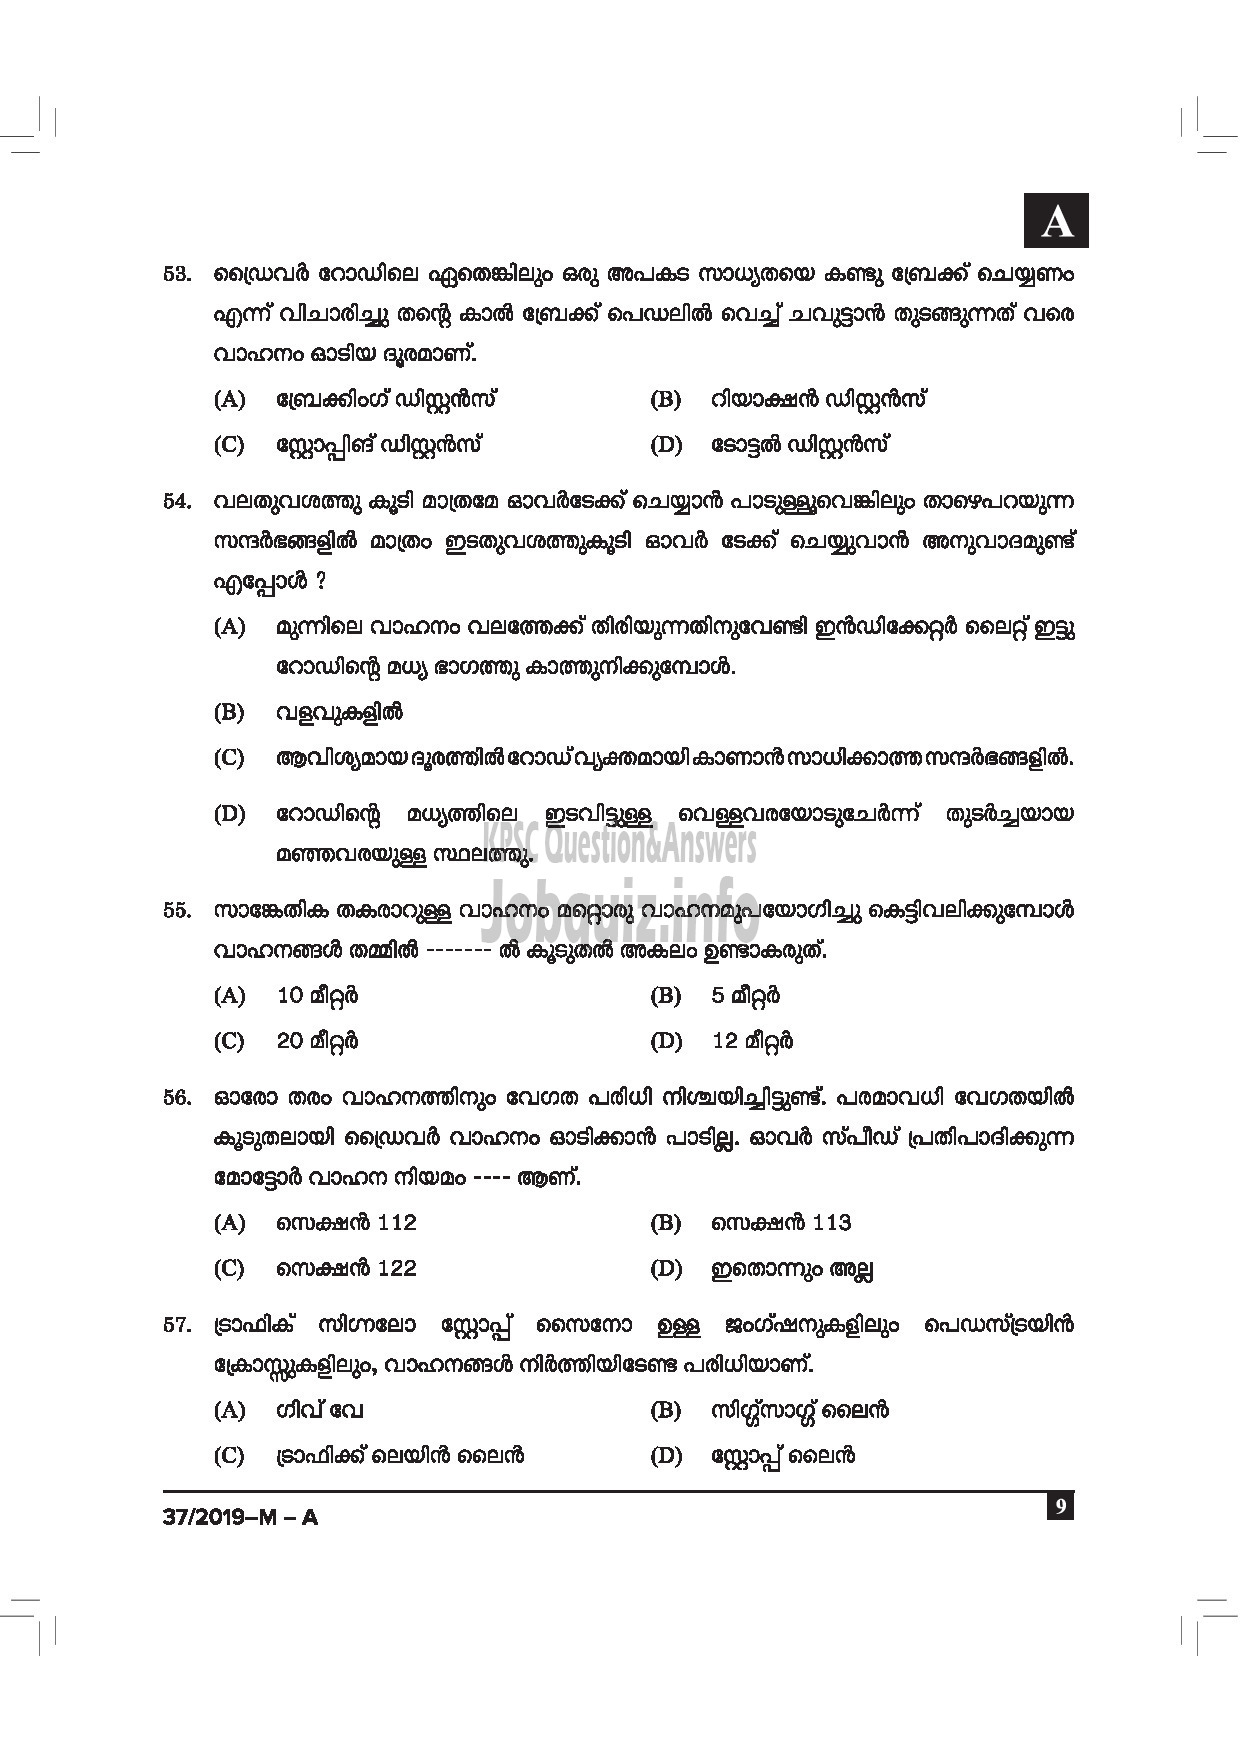 Kerala PSC Question Paper - DRIVER CUM OFFICE ATTENDANT / POLICE CONSTABLE DRIVER GOVT OWNED COMP / CORP / BOARD / POLICE MALAYALAM -9